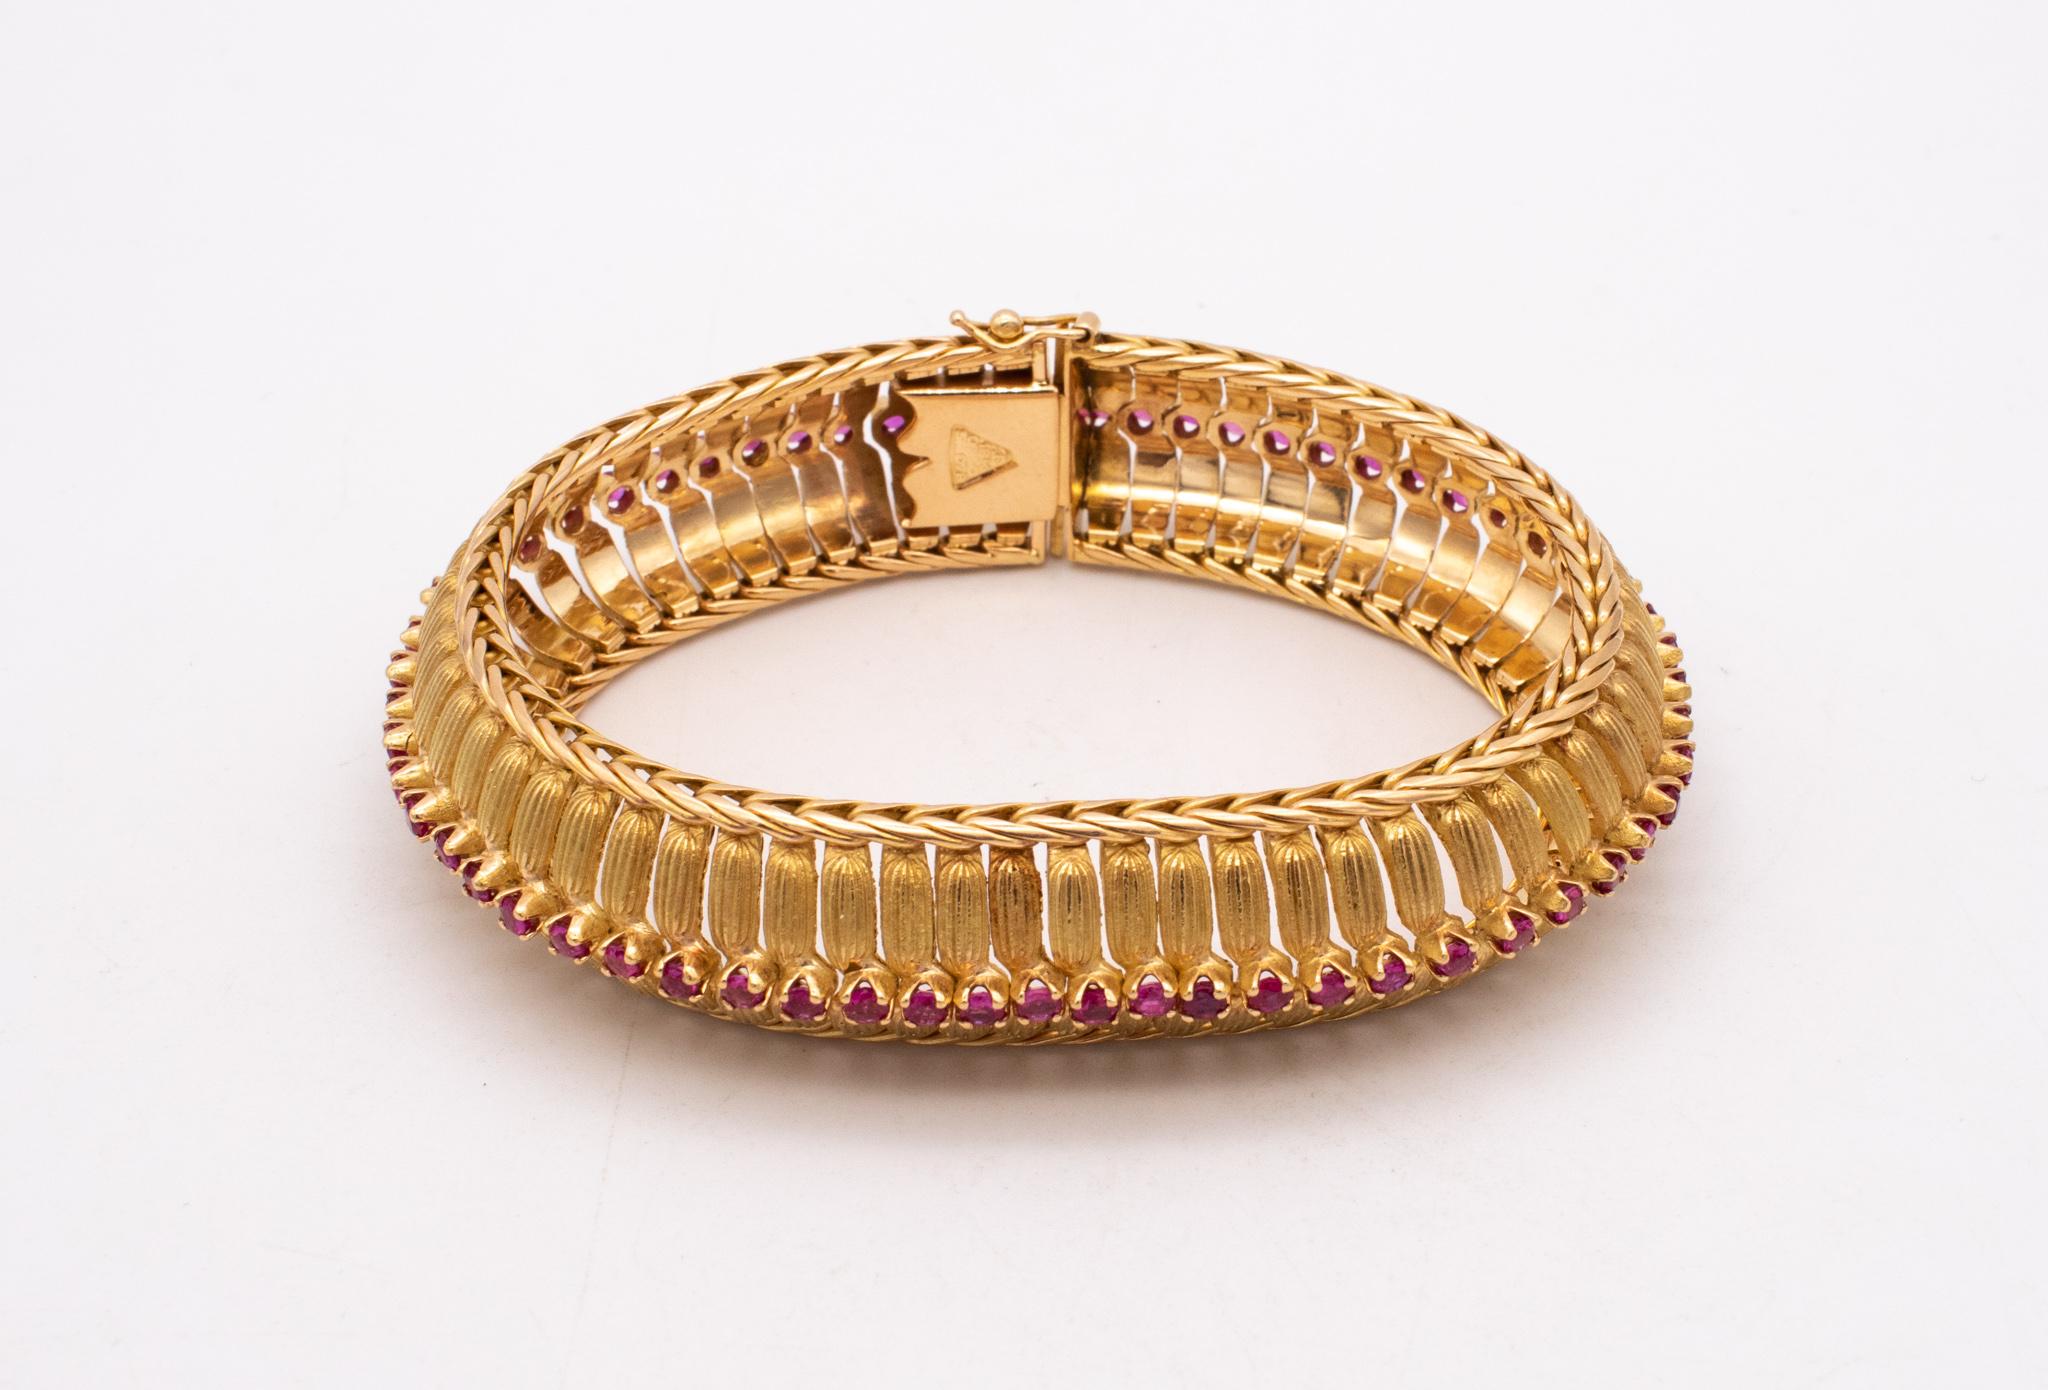 Italy Torino 1955 Designer Flexible Bracelet in Solid 18Kt Gold 6.25 Cts Rubies In Excellent Condition For Sale In Miami, FL